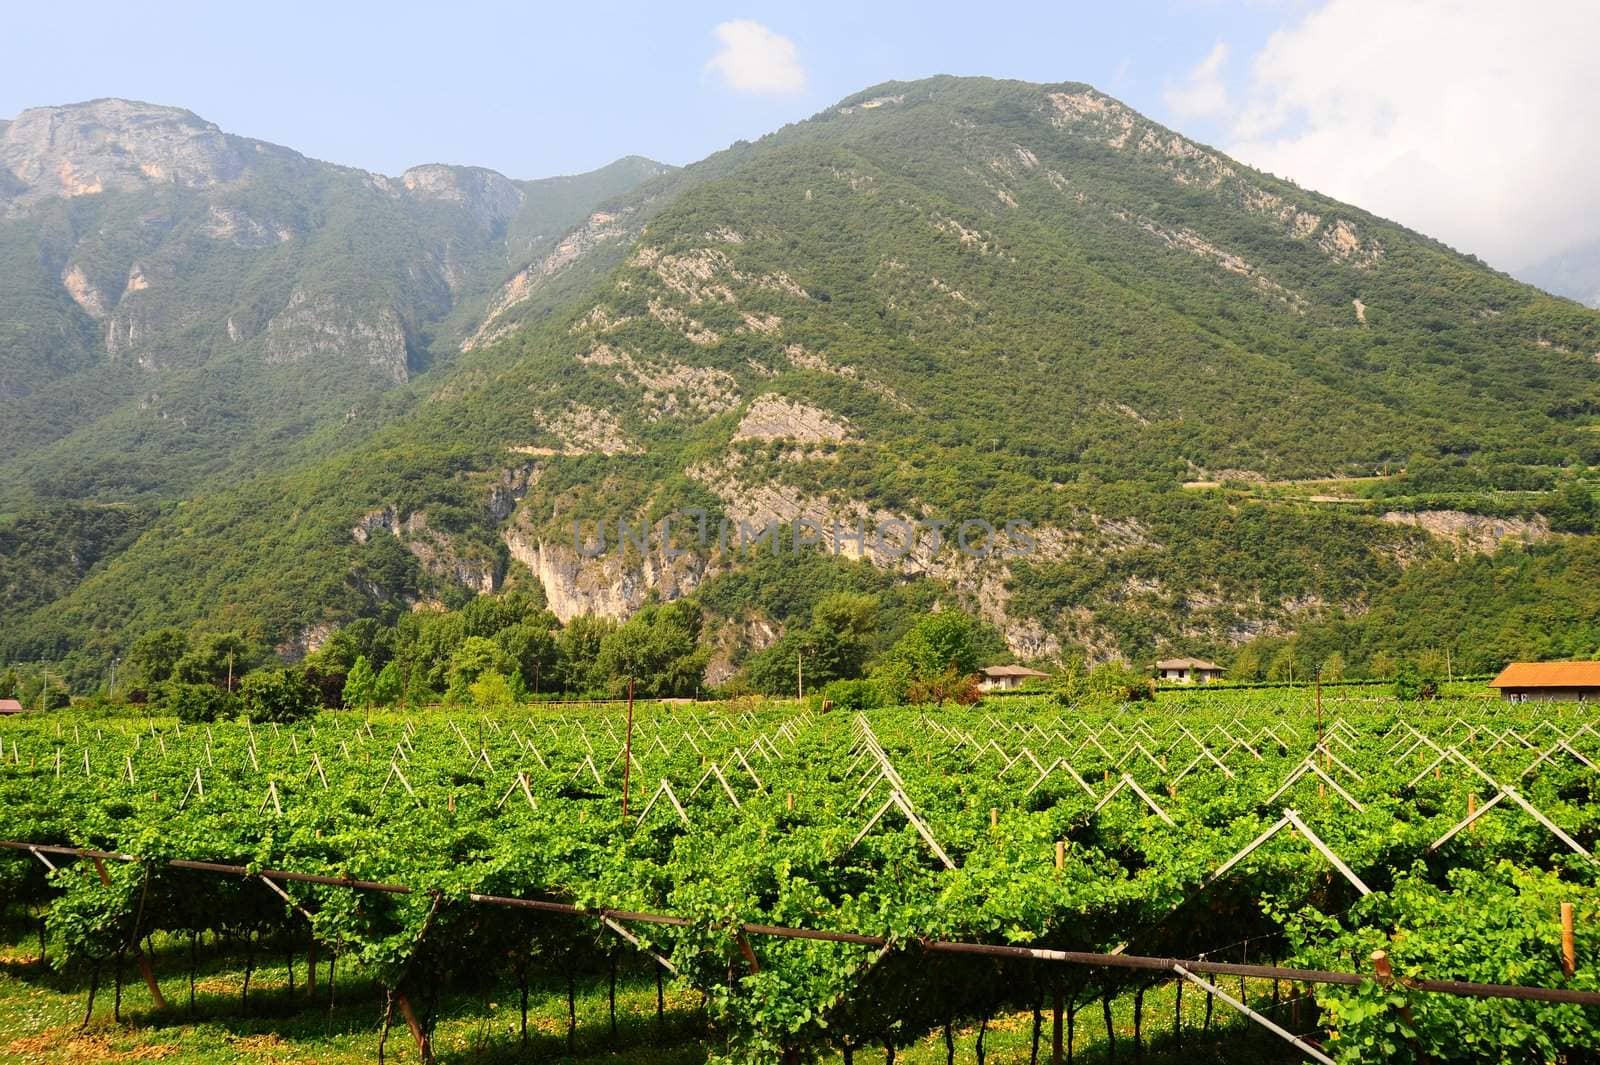 The Vineyard And Farm Houses At the foot Of The Italian Alps